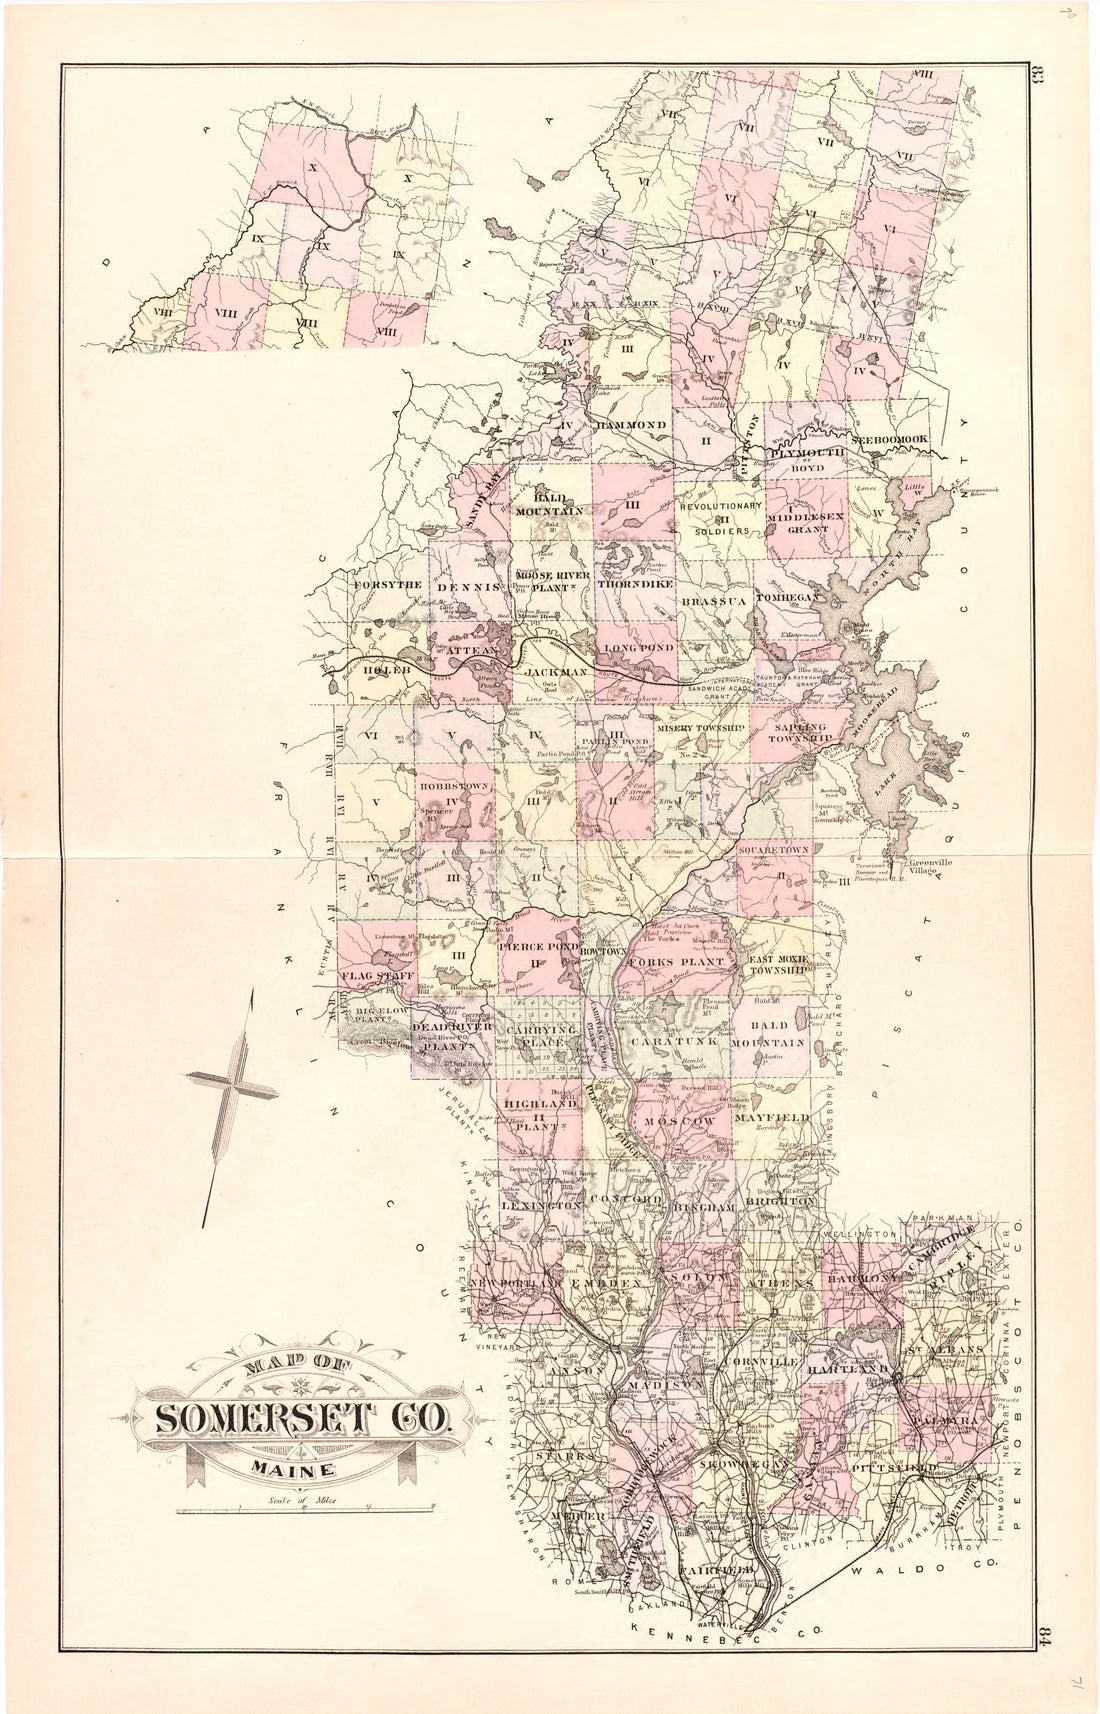 This hand drawn illustration (map) of Map of Somerset Co. Maine from Colby&